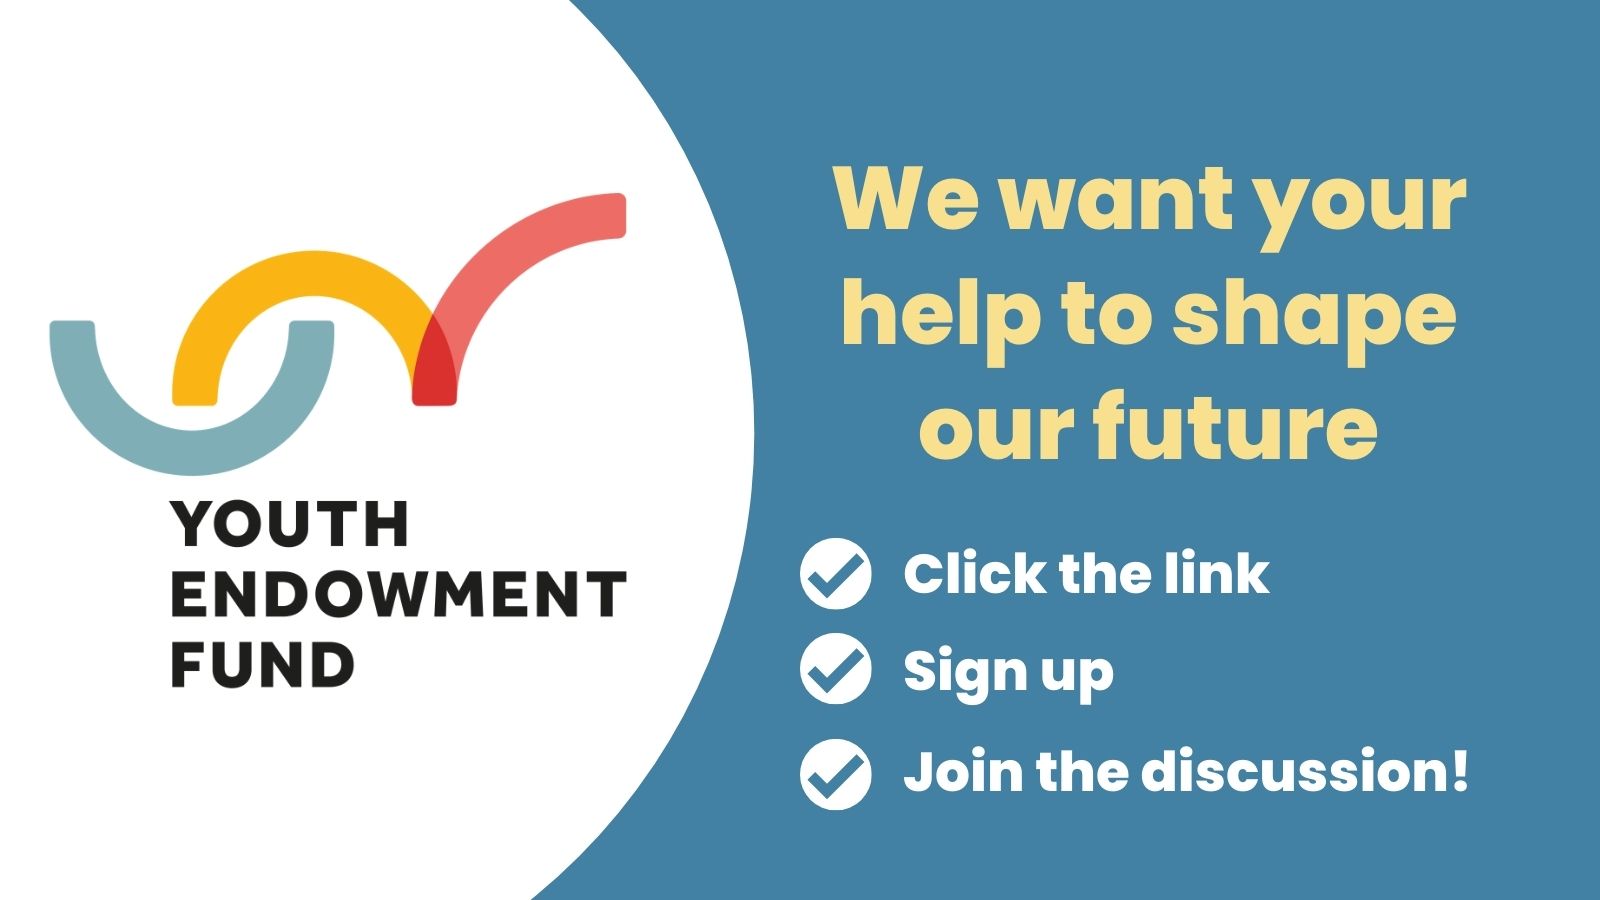 We want your help to shape our future